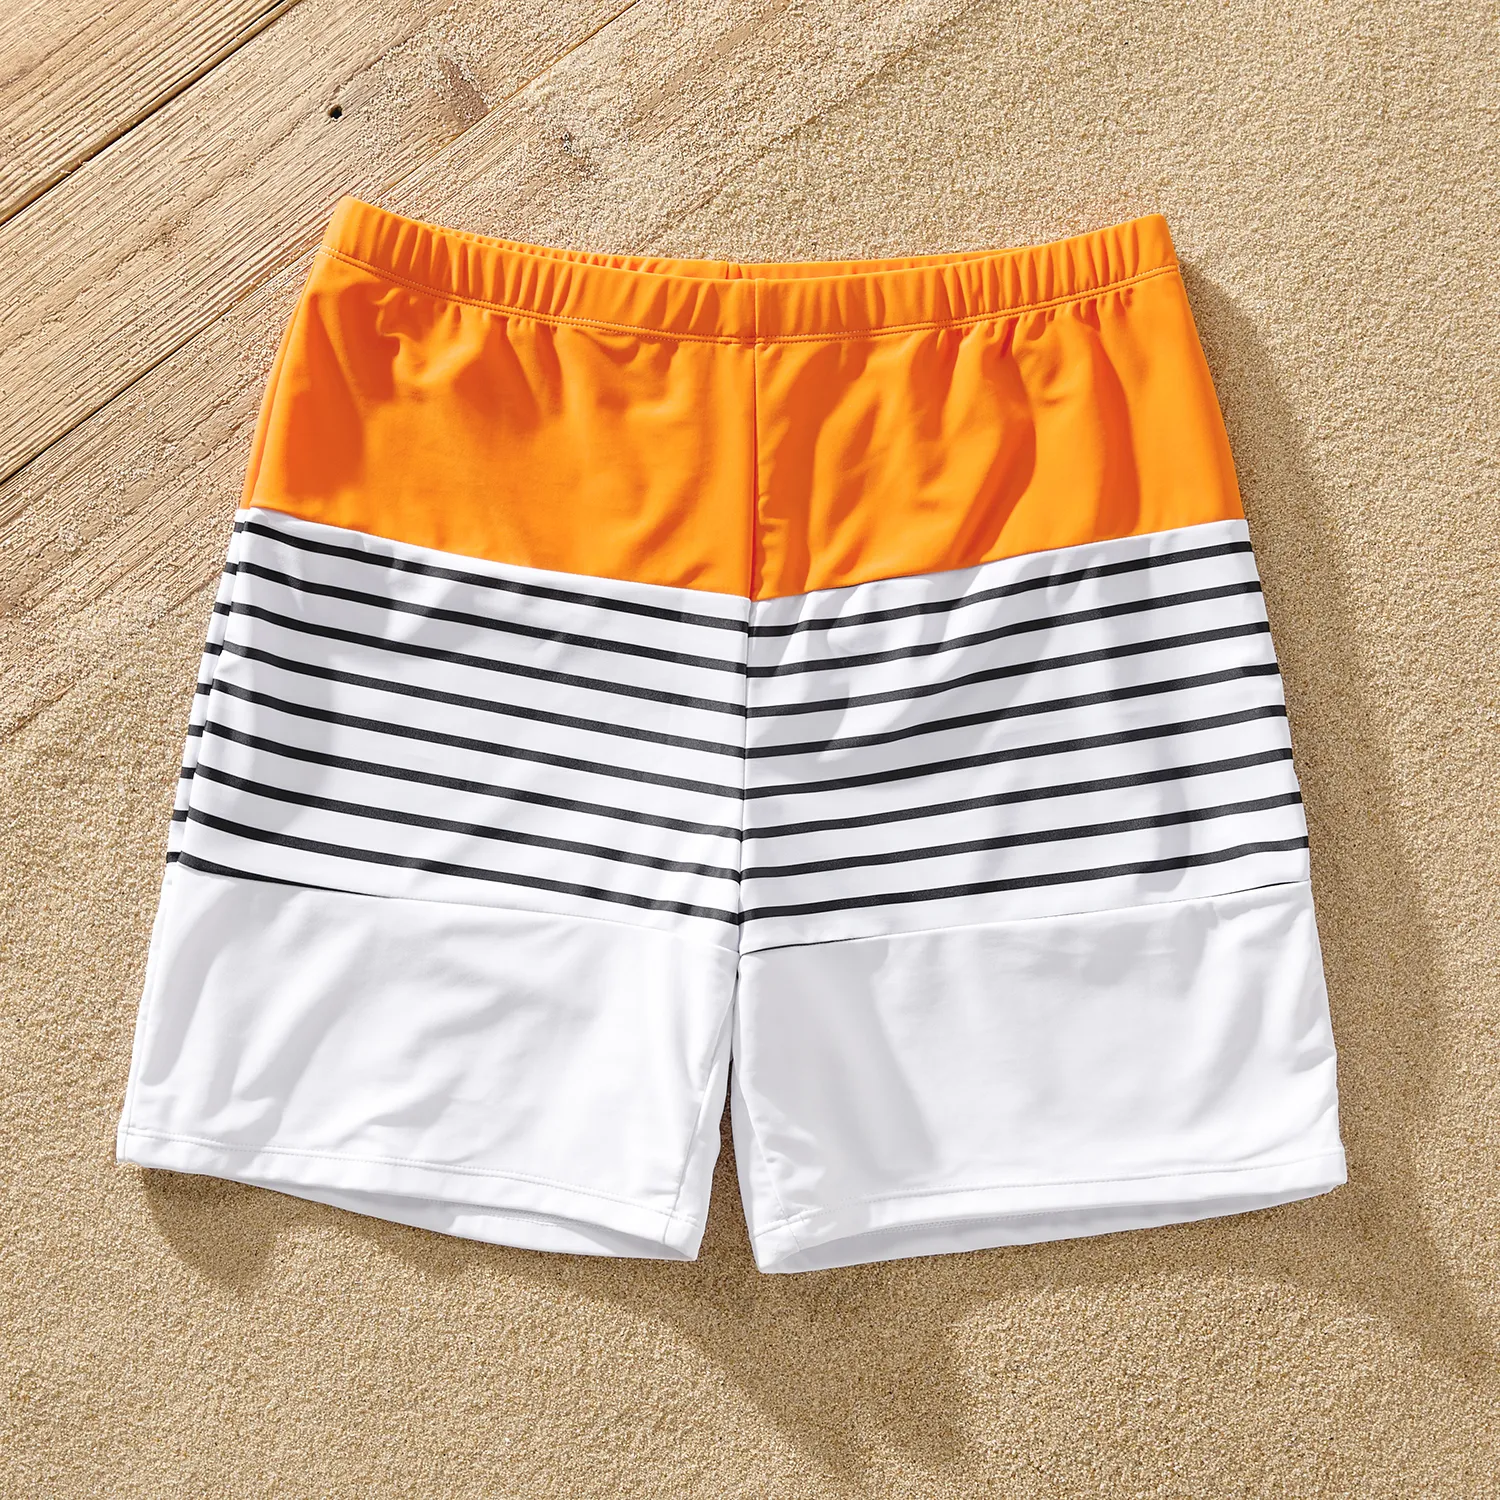 Family Matching Colorblock Spliced Cut Out One-piece Swimsuit Or Striped Swim Trunks Shorts